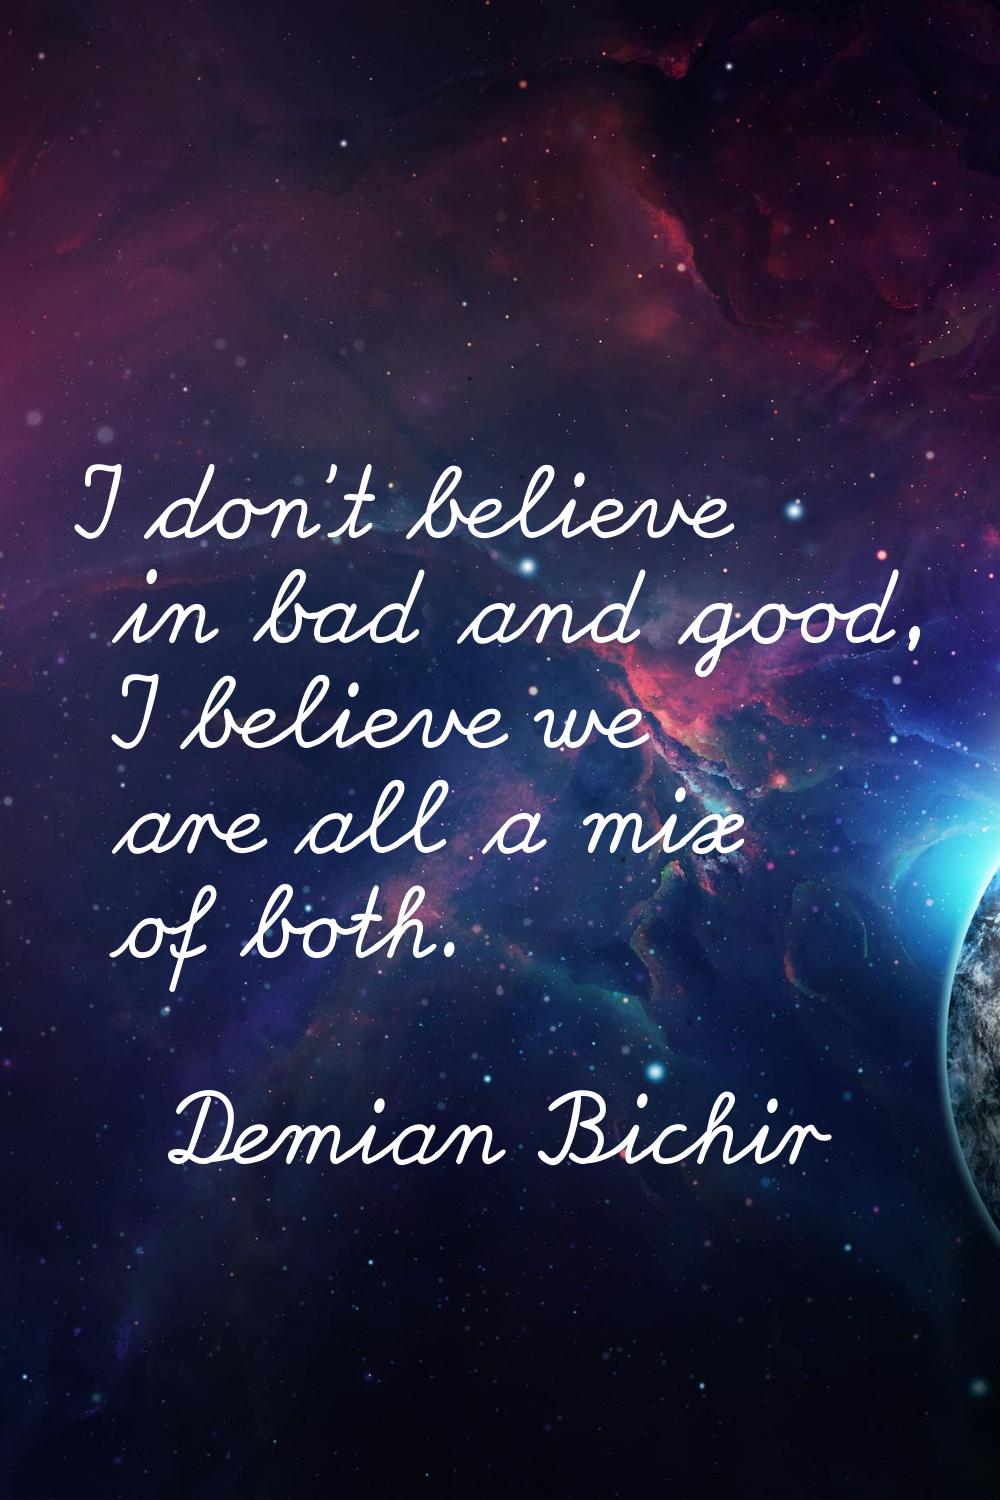 I don't believe in bad and good, I believe we are all a mix of both.